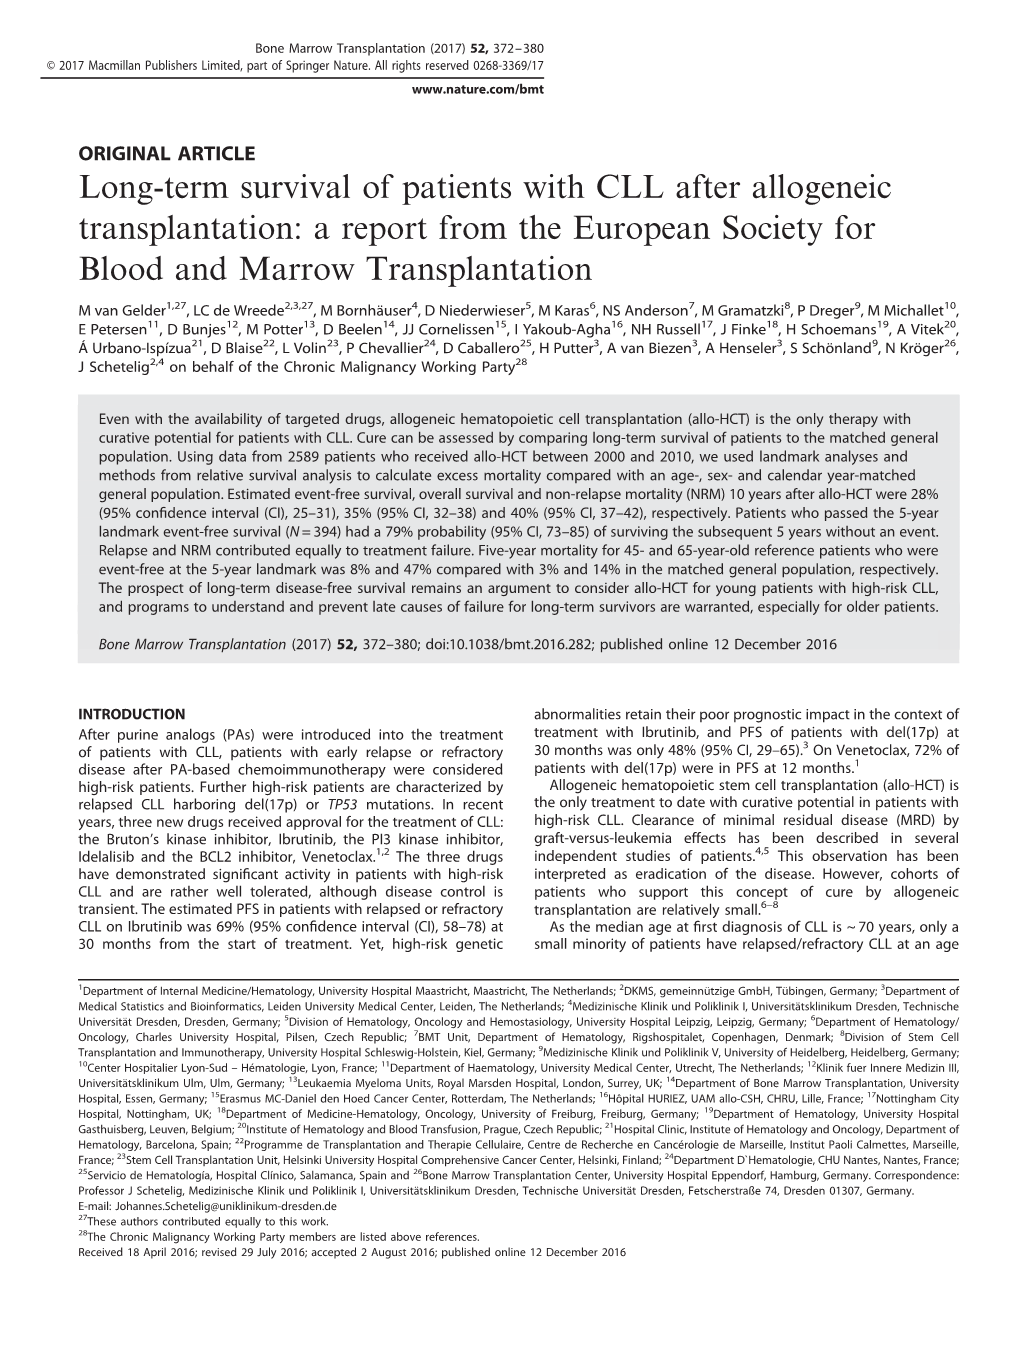 Long-Term Survival of Patients with CLL After Allogeneic Transplantation: a Report from the European Society for Blood and Marrow Transplantation